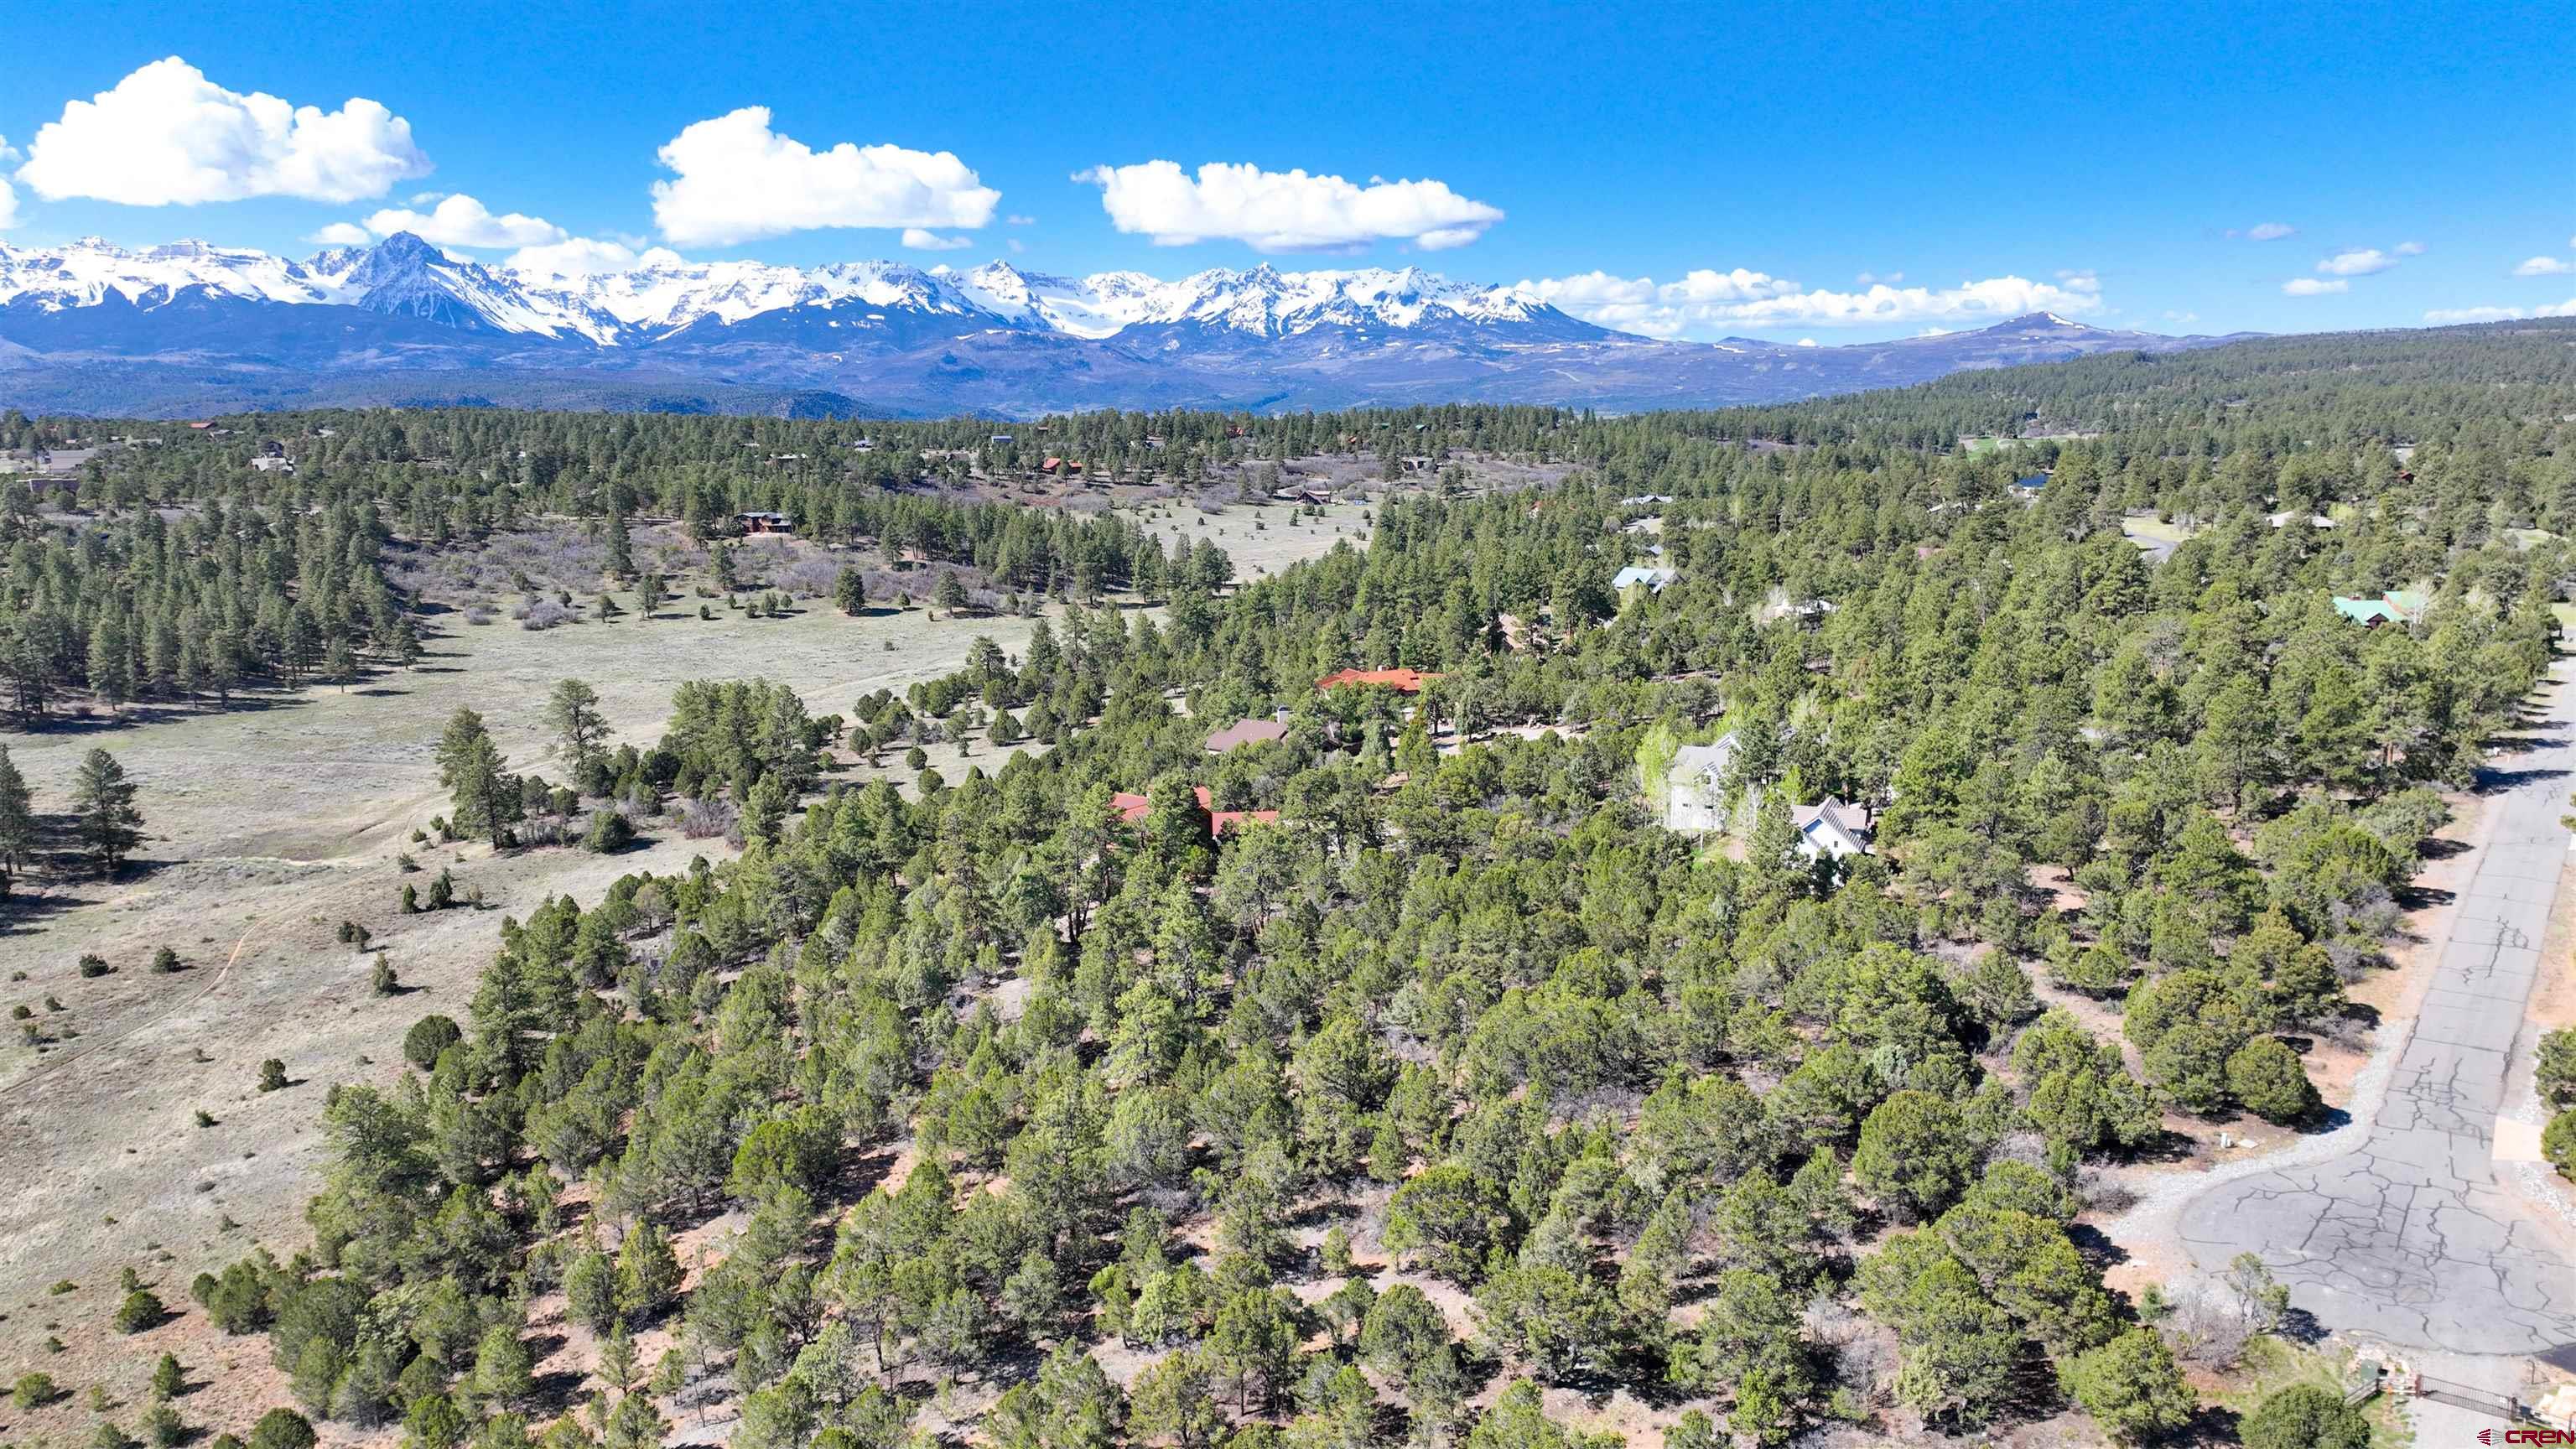 This nearly 1-acre lot in Divide Ranch and Club offers an exceptional opportunity to embrace the views of  San Juan and Cimarron mountain ranges with its elevated location. Situated on a cul-de-sac, expiorence privacy. Its convenient location places it just 15 minutes from Ridgway, providing easy access to amenities, while Montrose is only 30 minutes away, and the renowned ski destination of Telluride is a scenic 45-minute drive. However you look at it this lot offers you the opportyunity to build on a exceptional homesite.